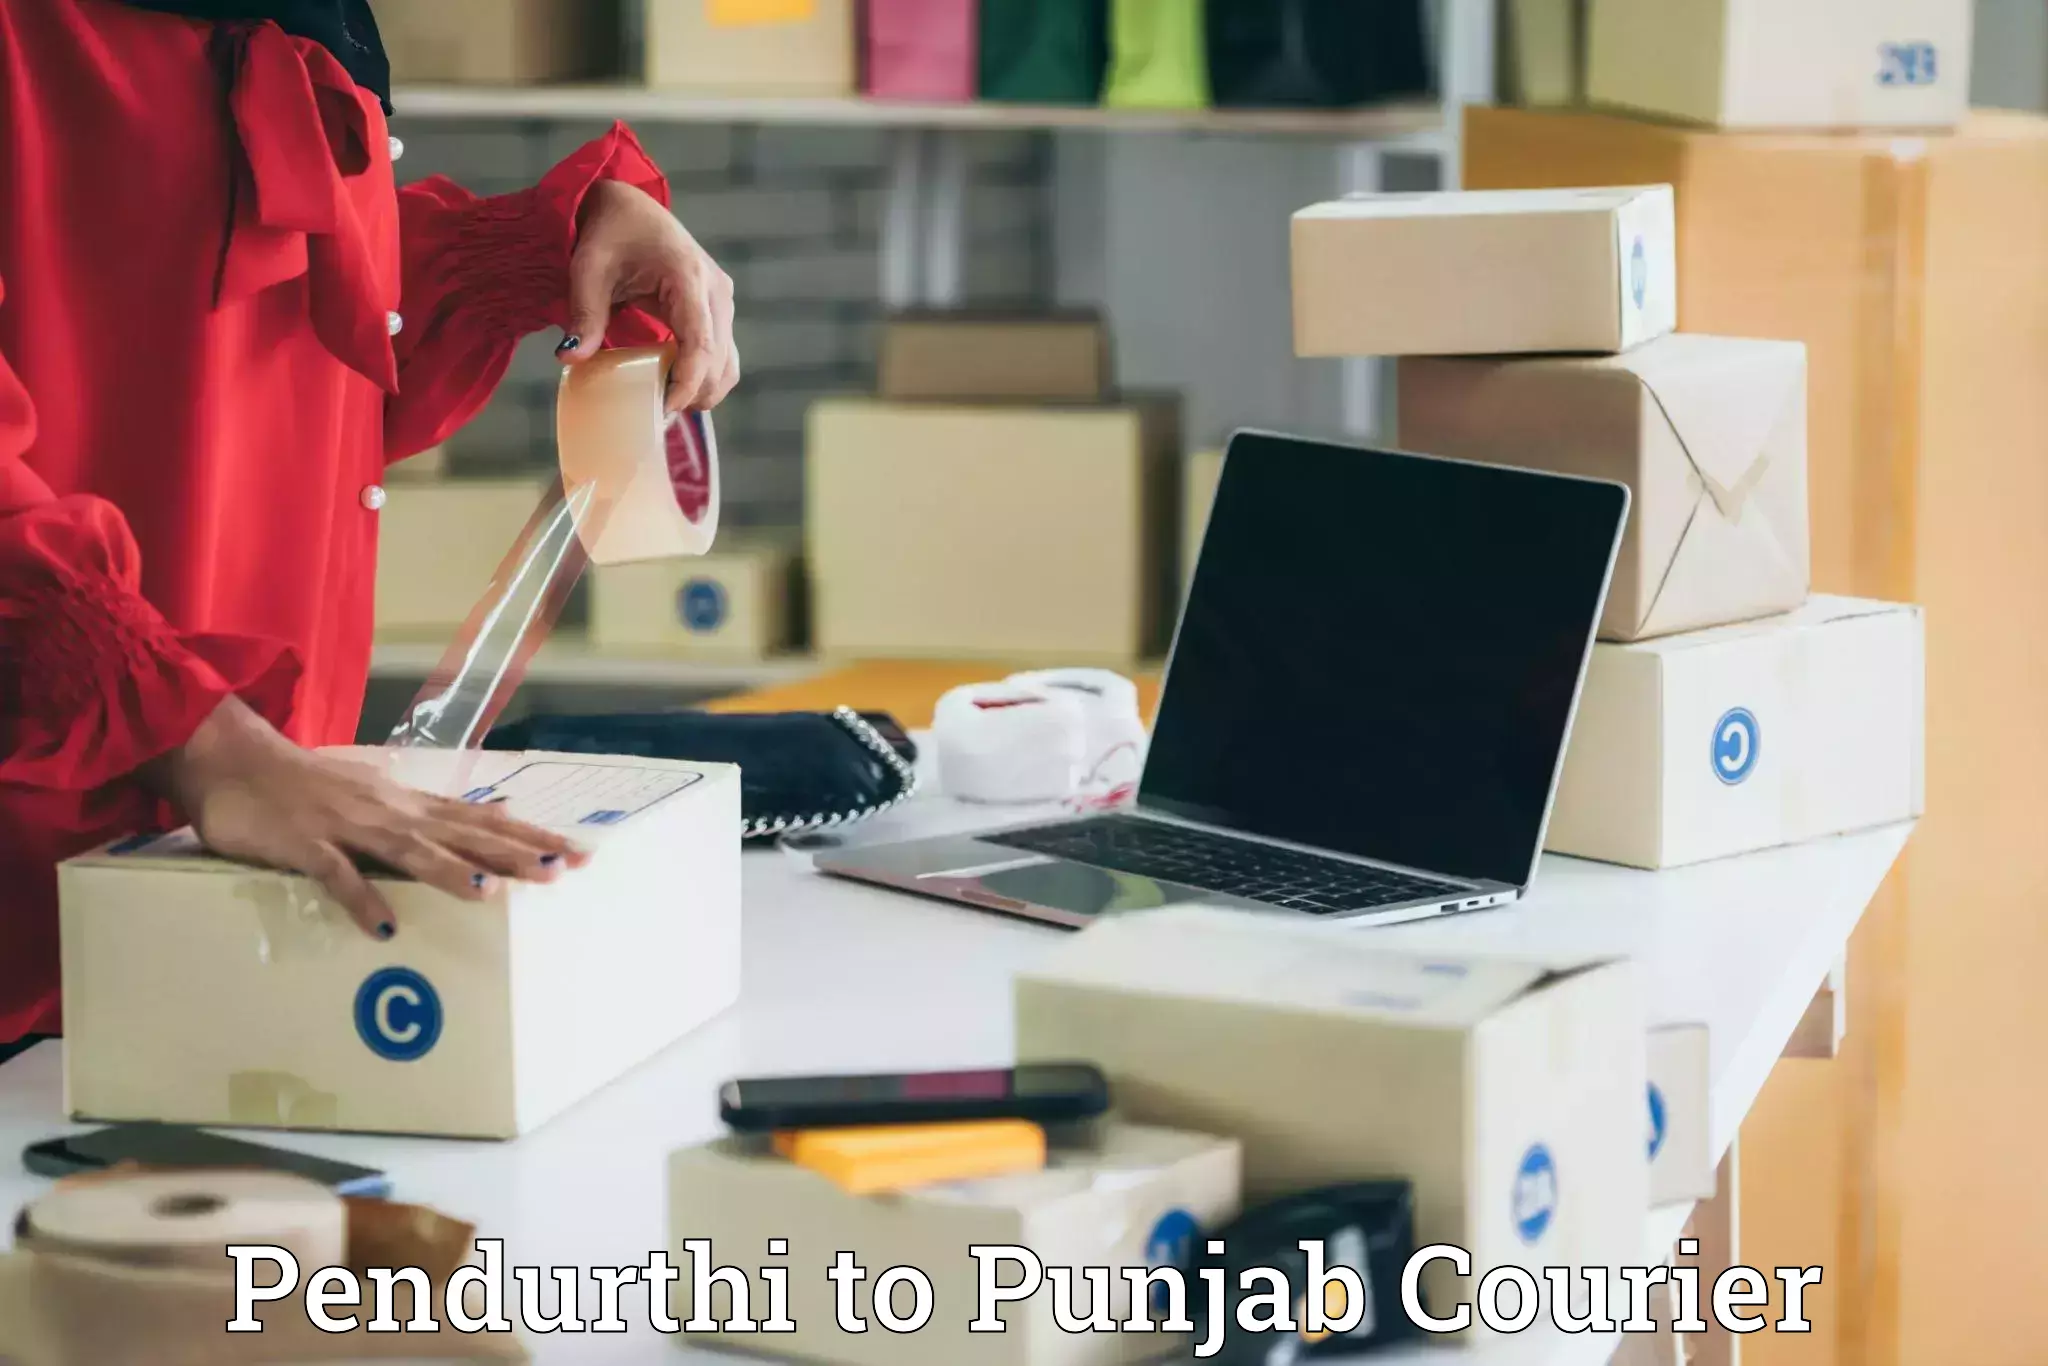 Next-day delivery options Pendurthi to Punjab